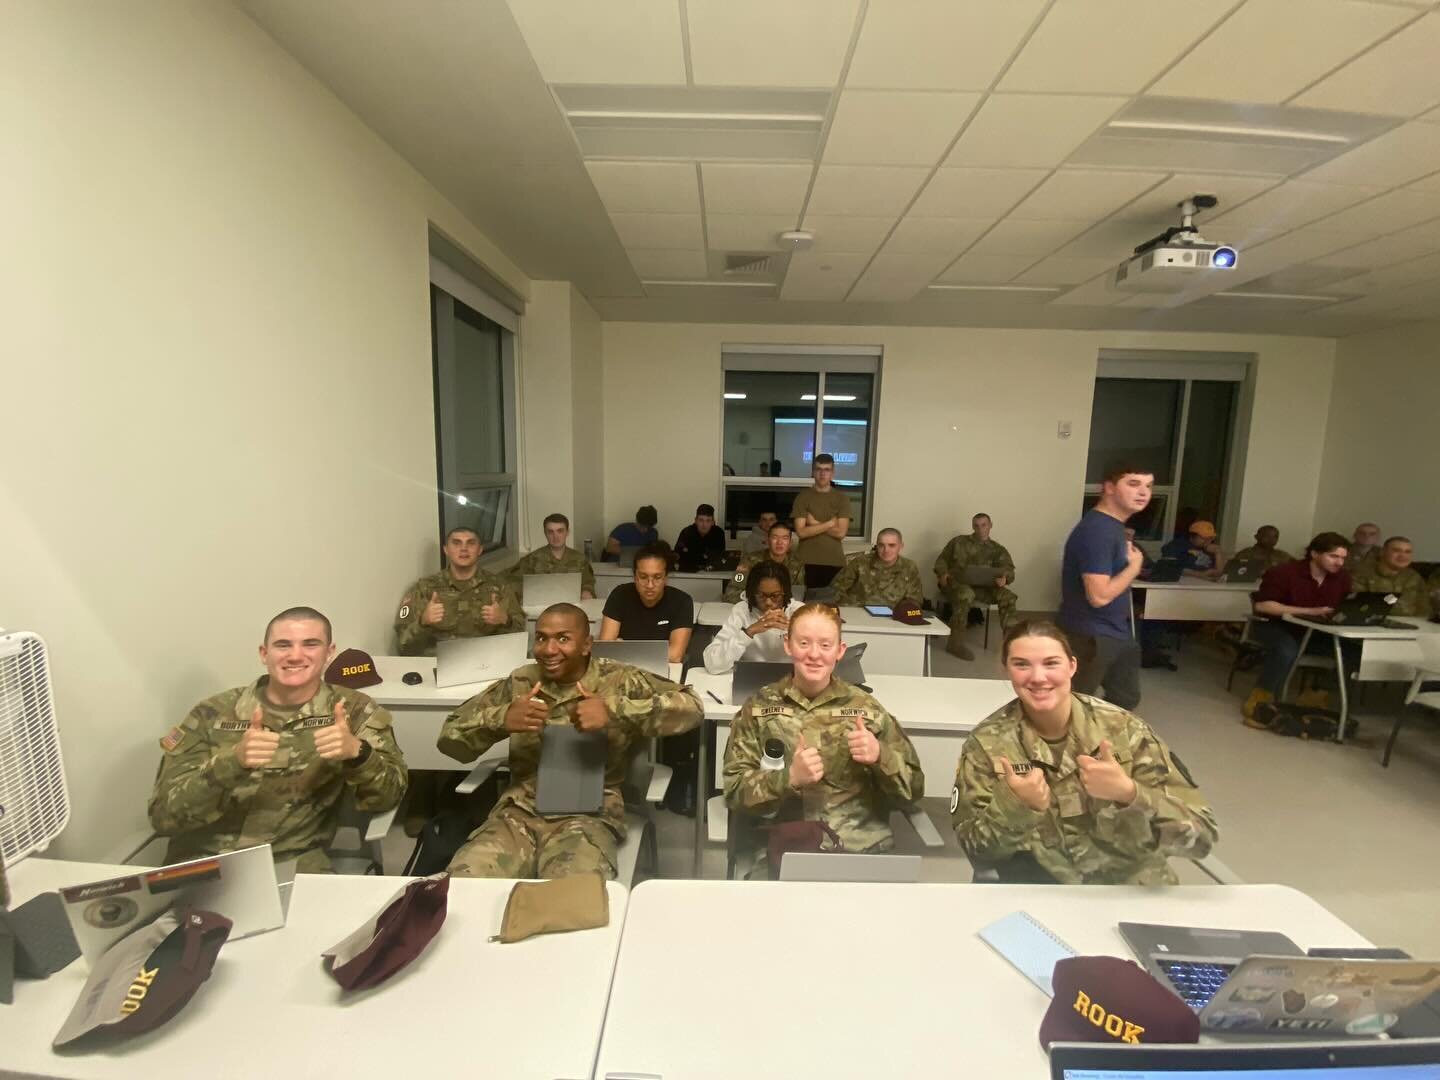 Thumbs up for another successful meeting! 👍

On Thursday, members of Unit 1819 downloaded Kali-Linux virtual machines, went over Pico CTF challenges, and signed up for the upcoming NSA Codebreaker Challenge!